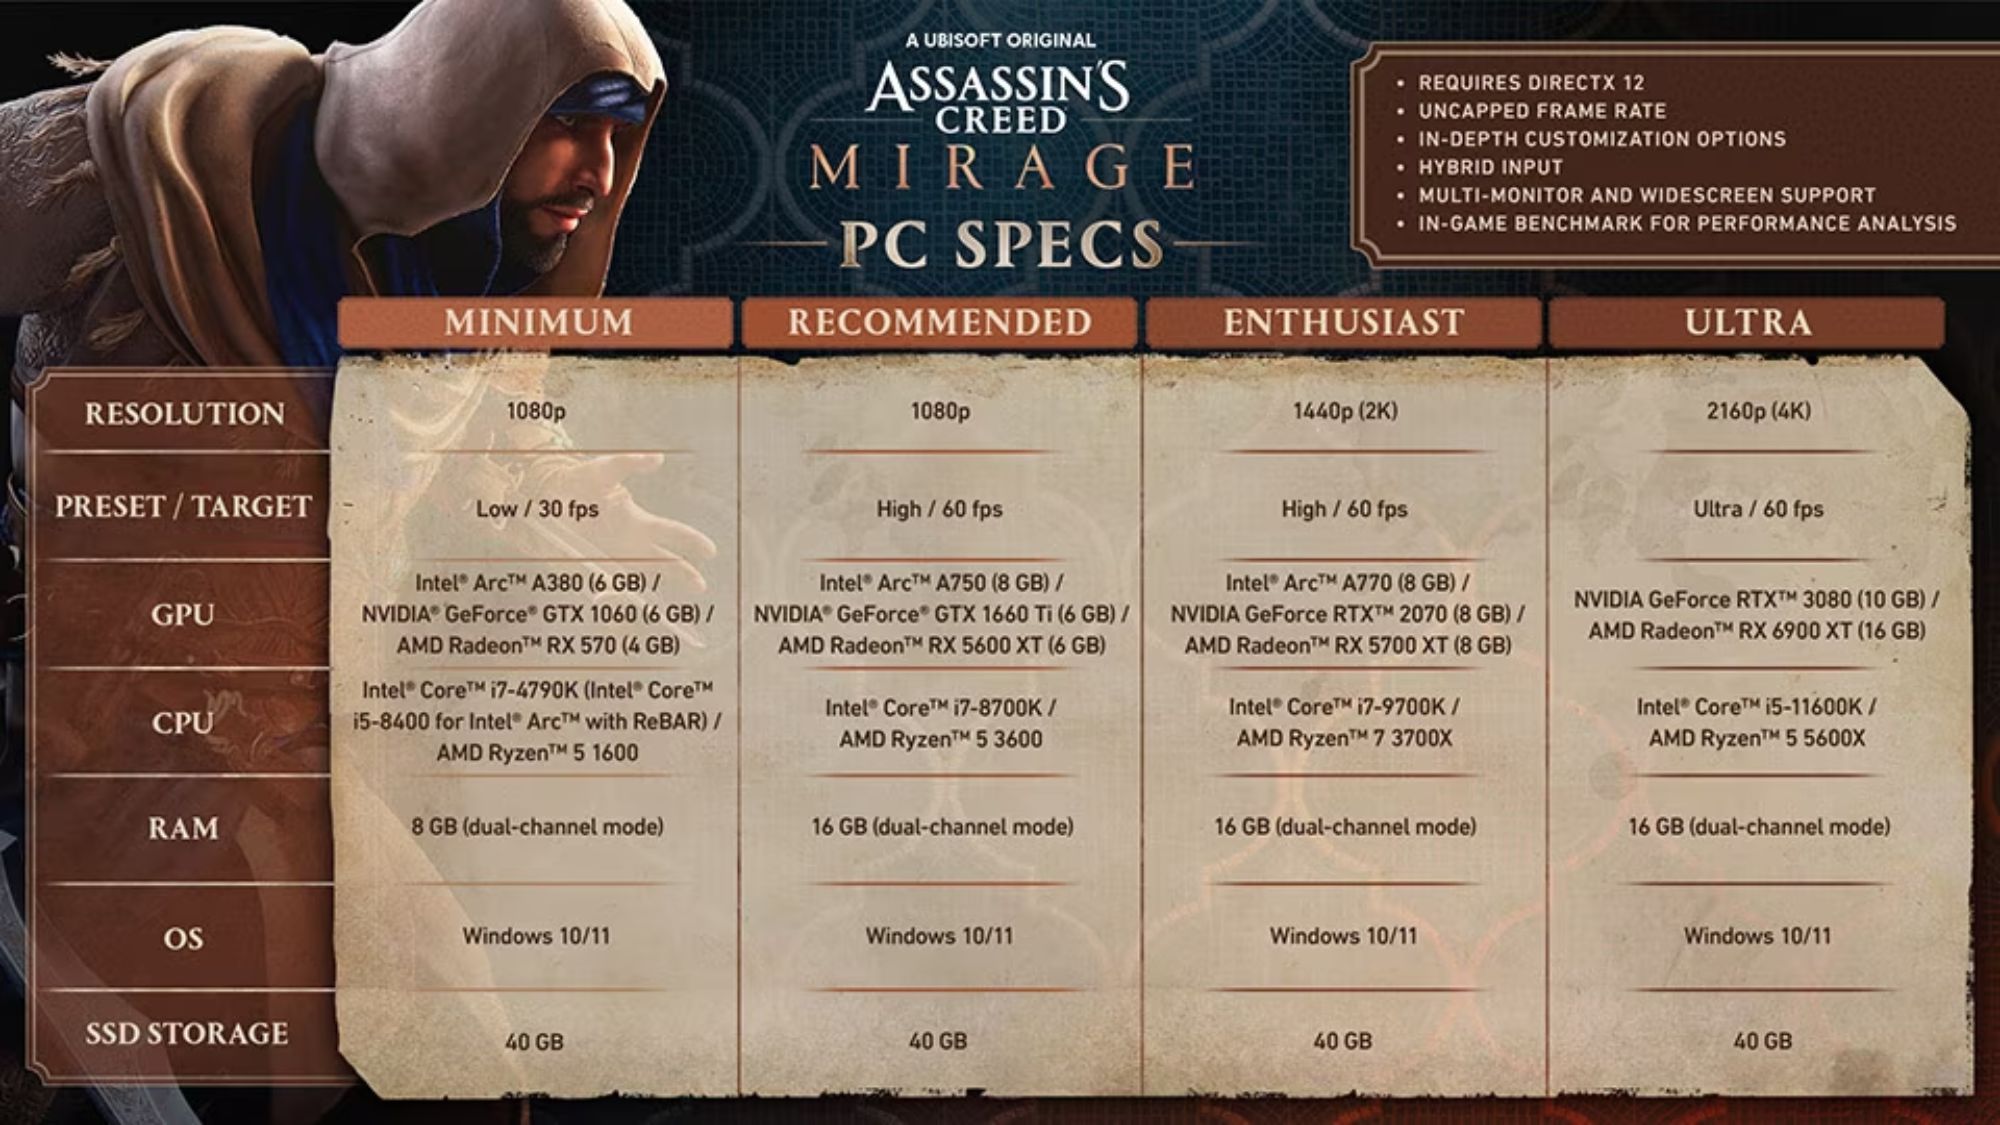 Assassin's Creed Mirage PC specs